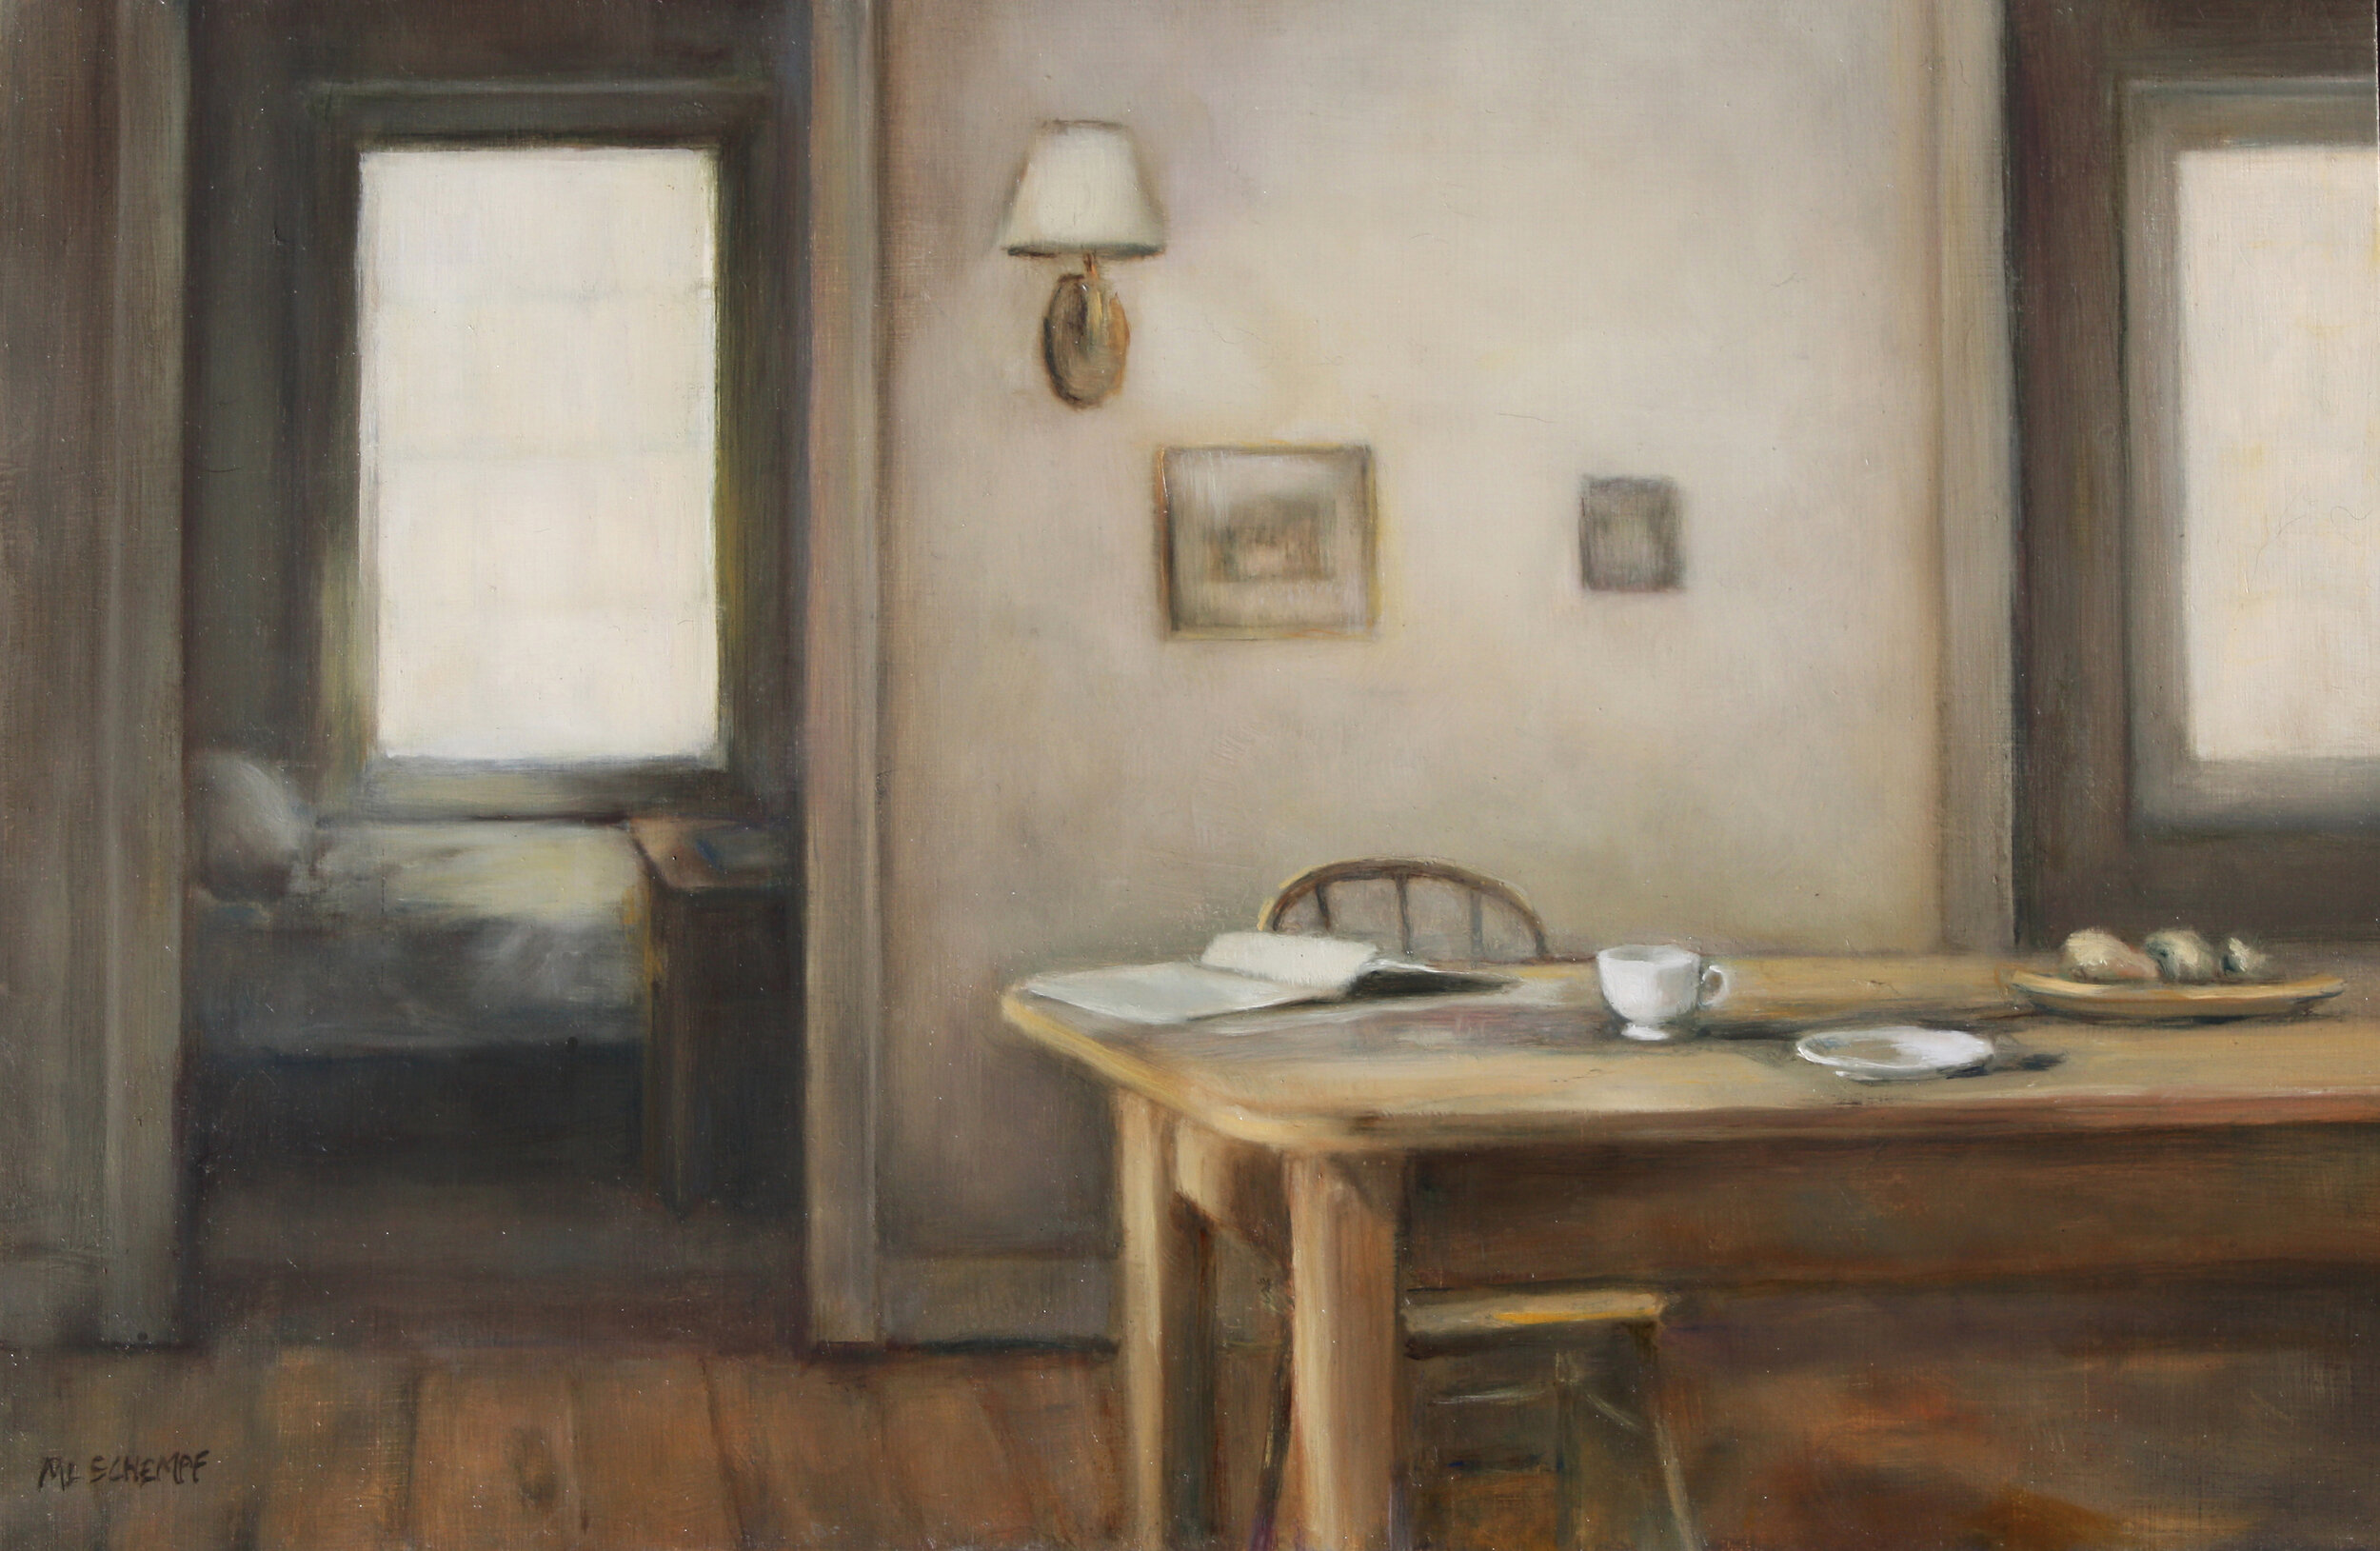  Mary Lou Schempf  Interior with Table,  9” x  14”, oil on board  (private collection)  